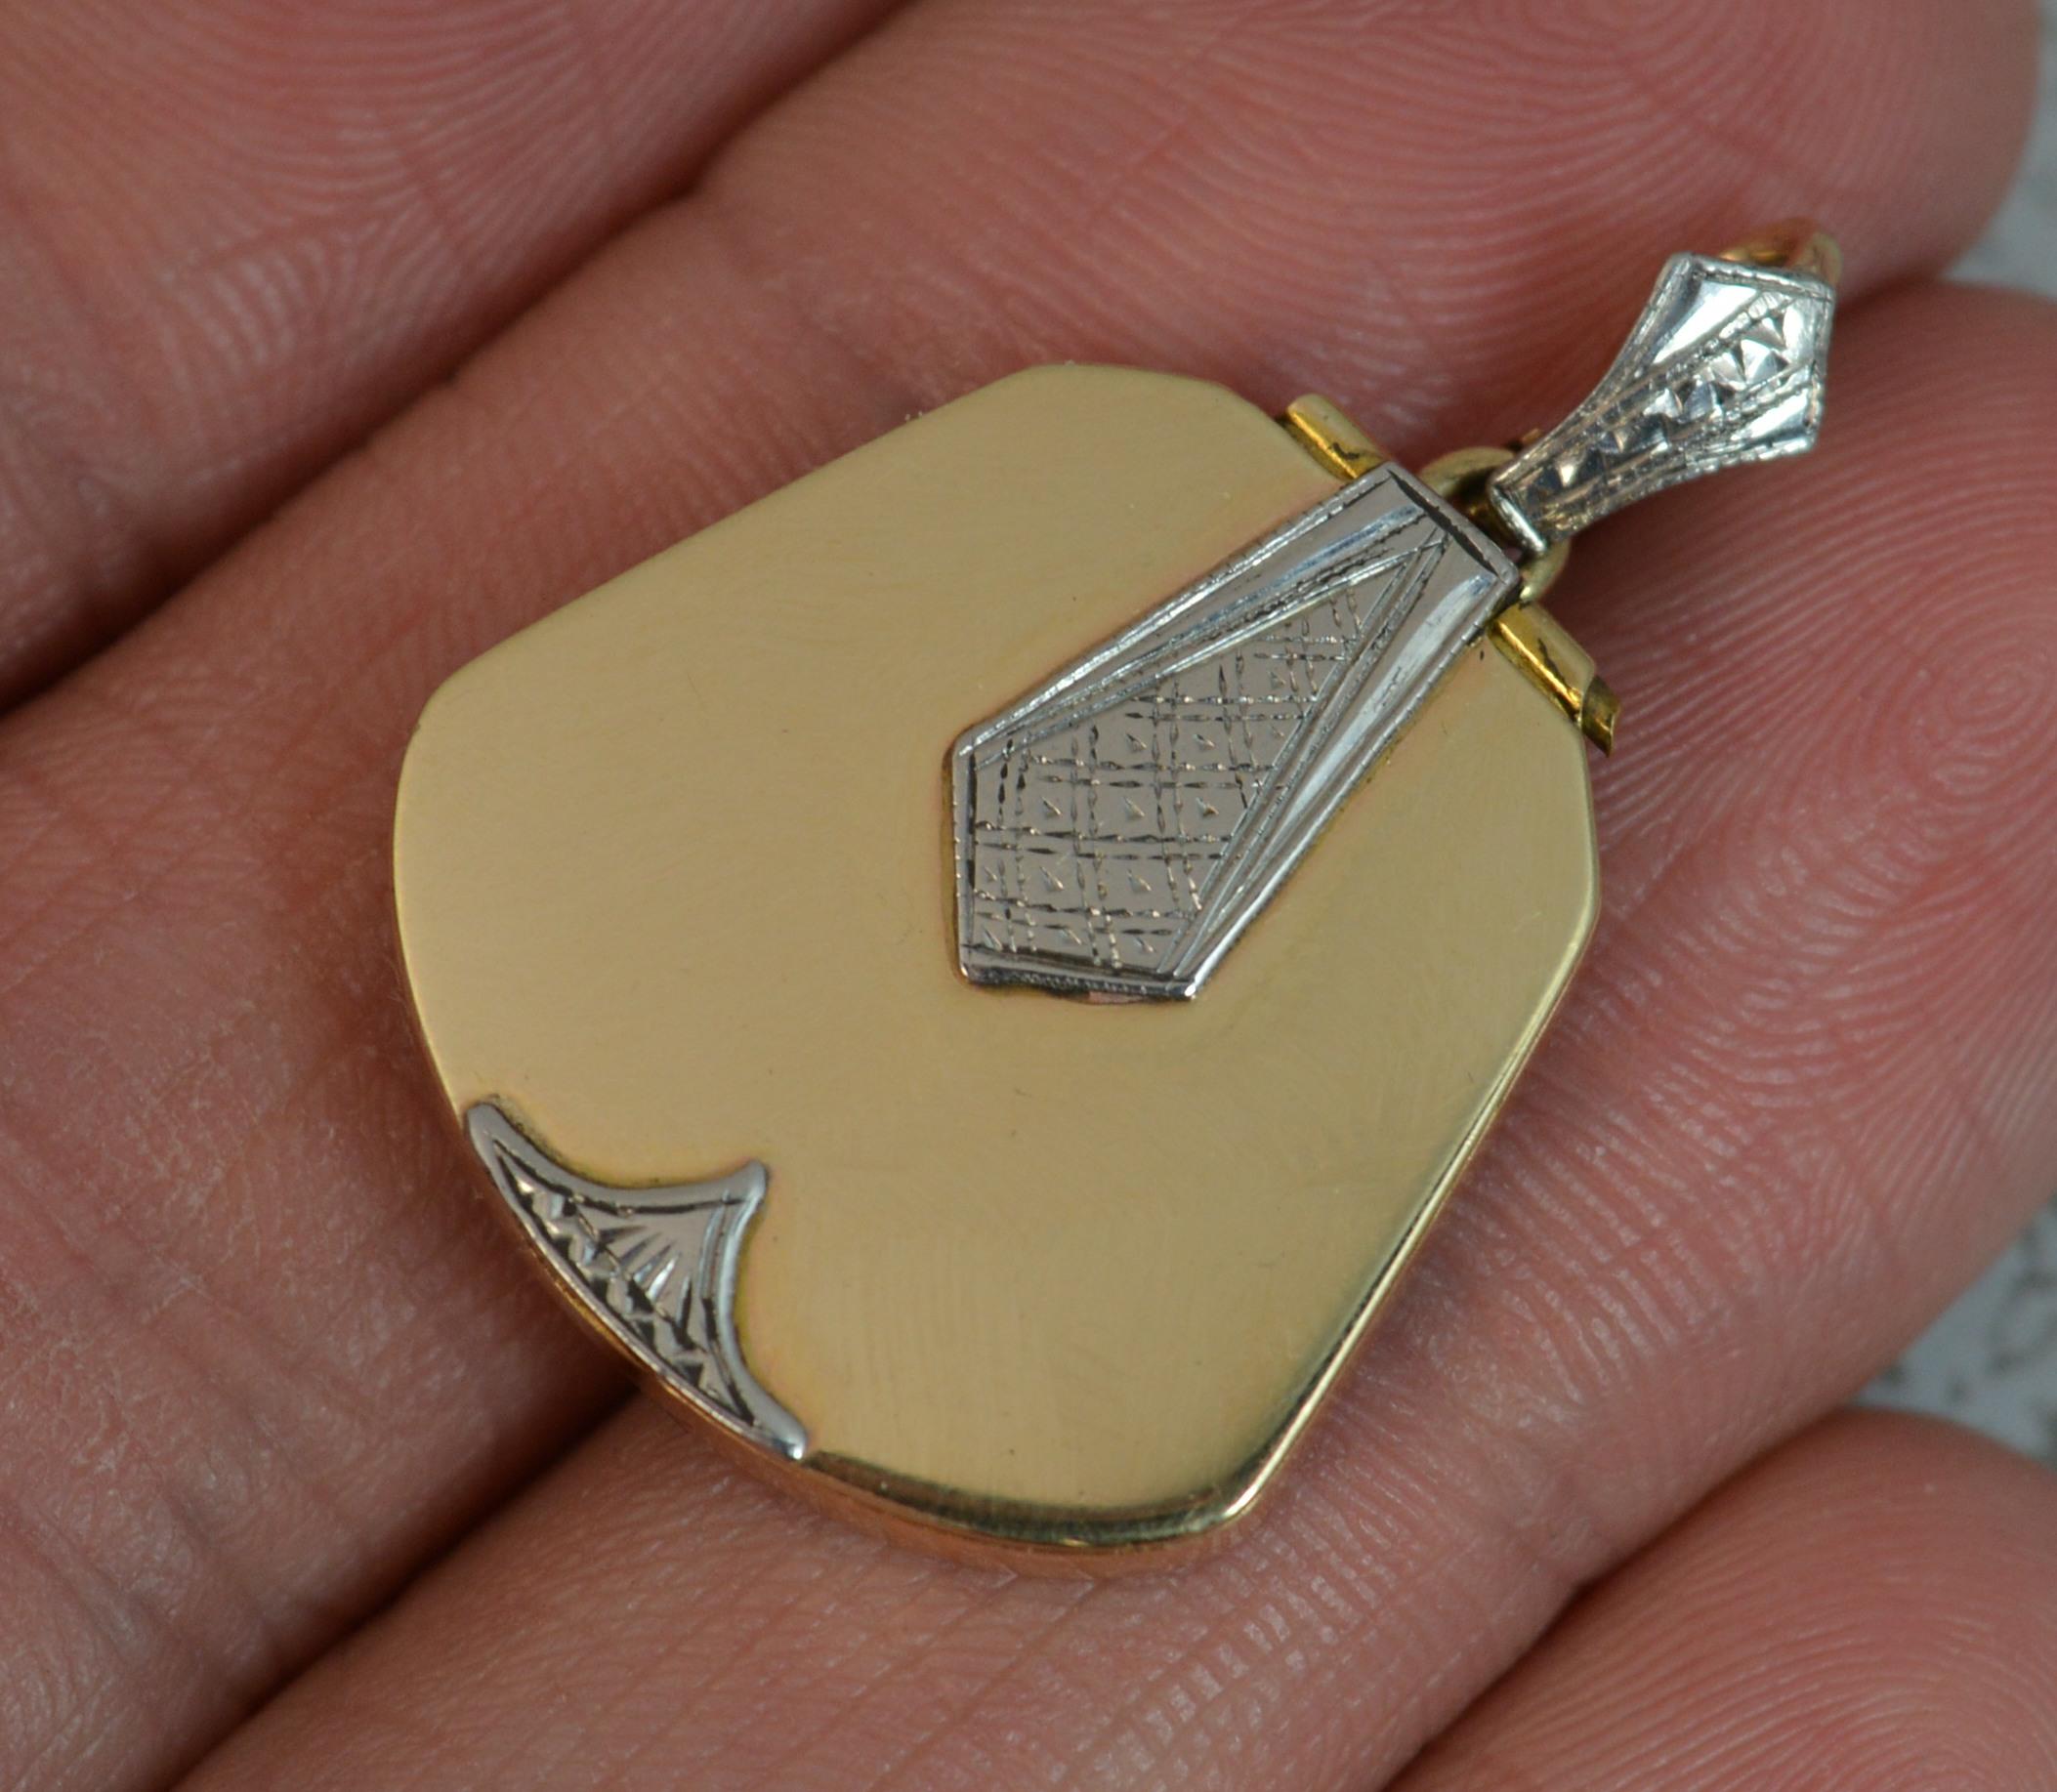 A gorgeous Art Deco period locket pendant.
True antique example, circa 1930.
Modelled in 9 carat yellow gold of plain design with patterned palladium pieces applied to front.
CONDITION ; Very good for age. Crisp design and hinge. Matching bale. No